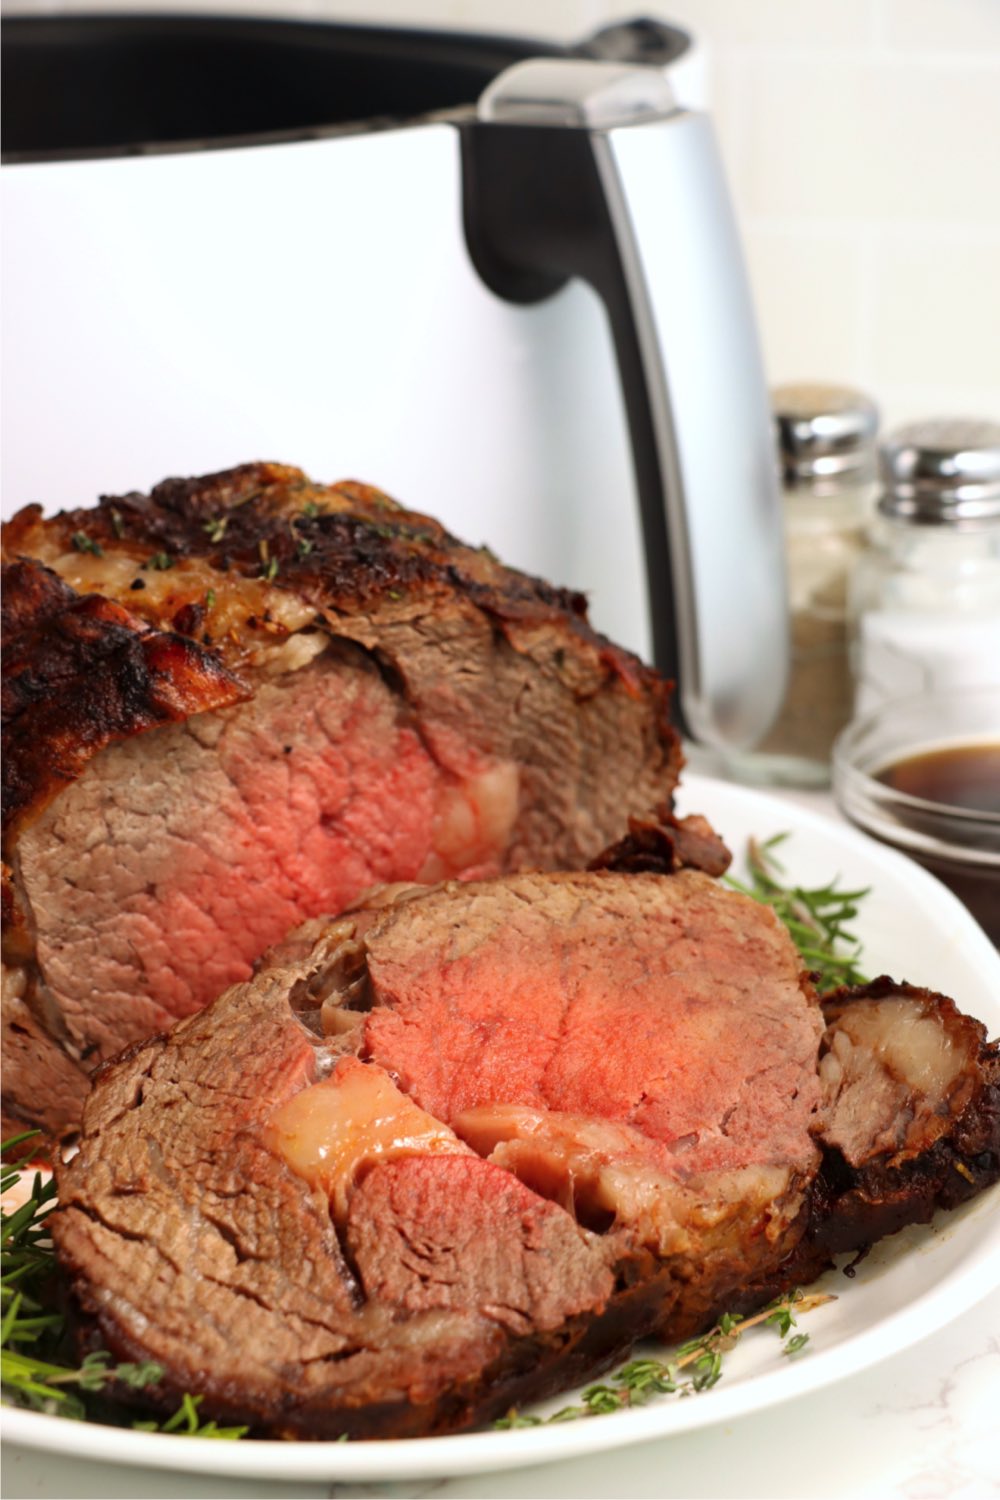 slices of prime rib in front of air fryer